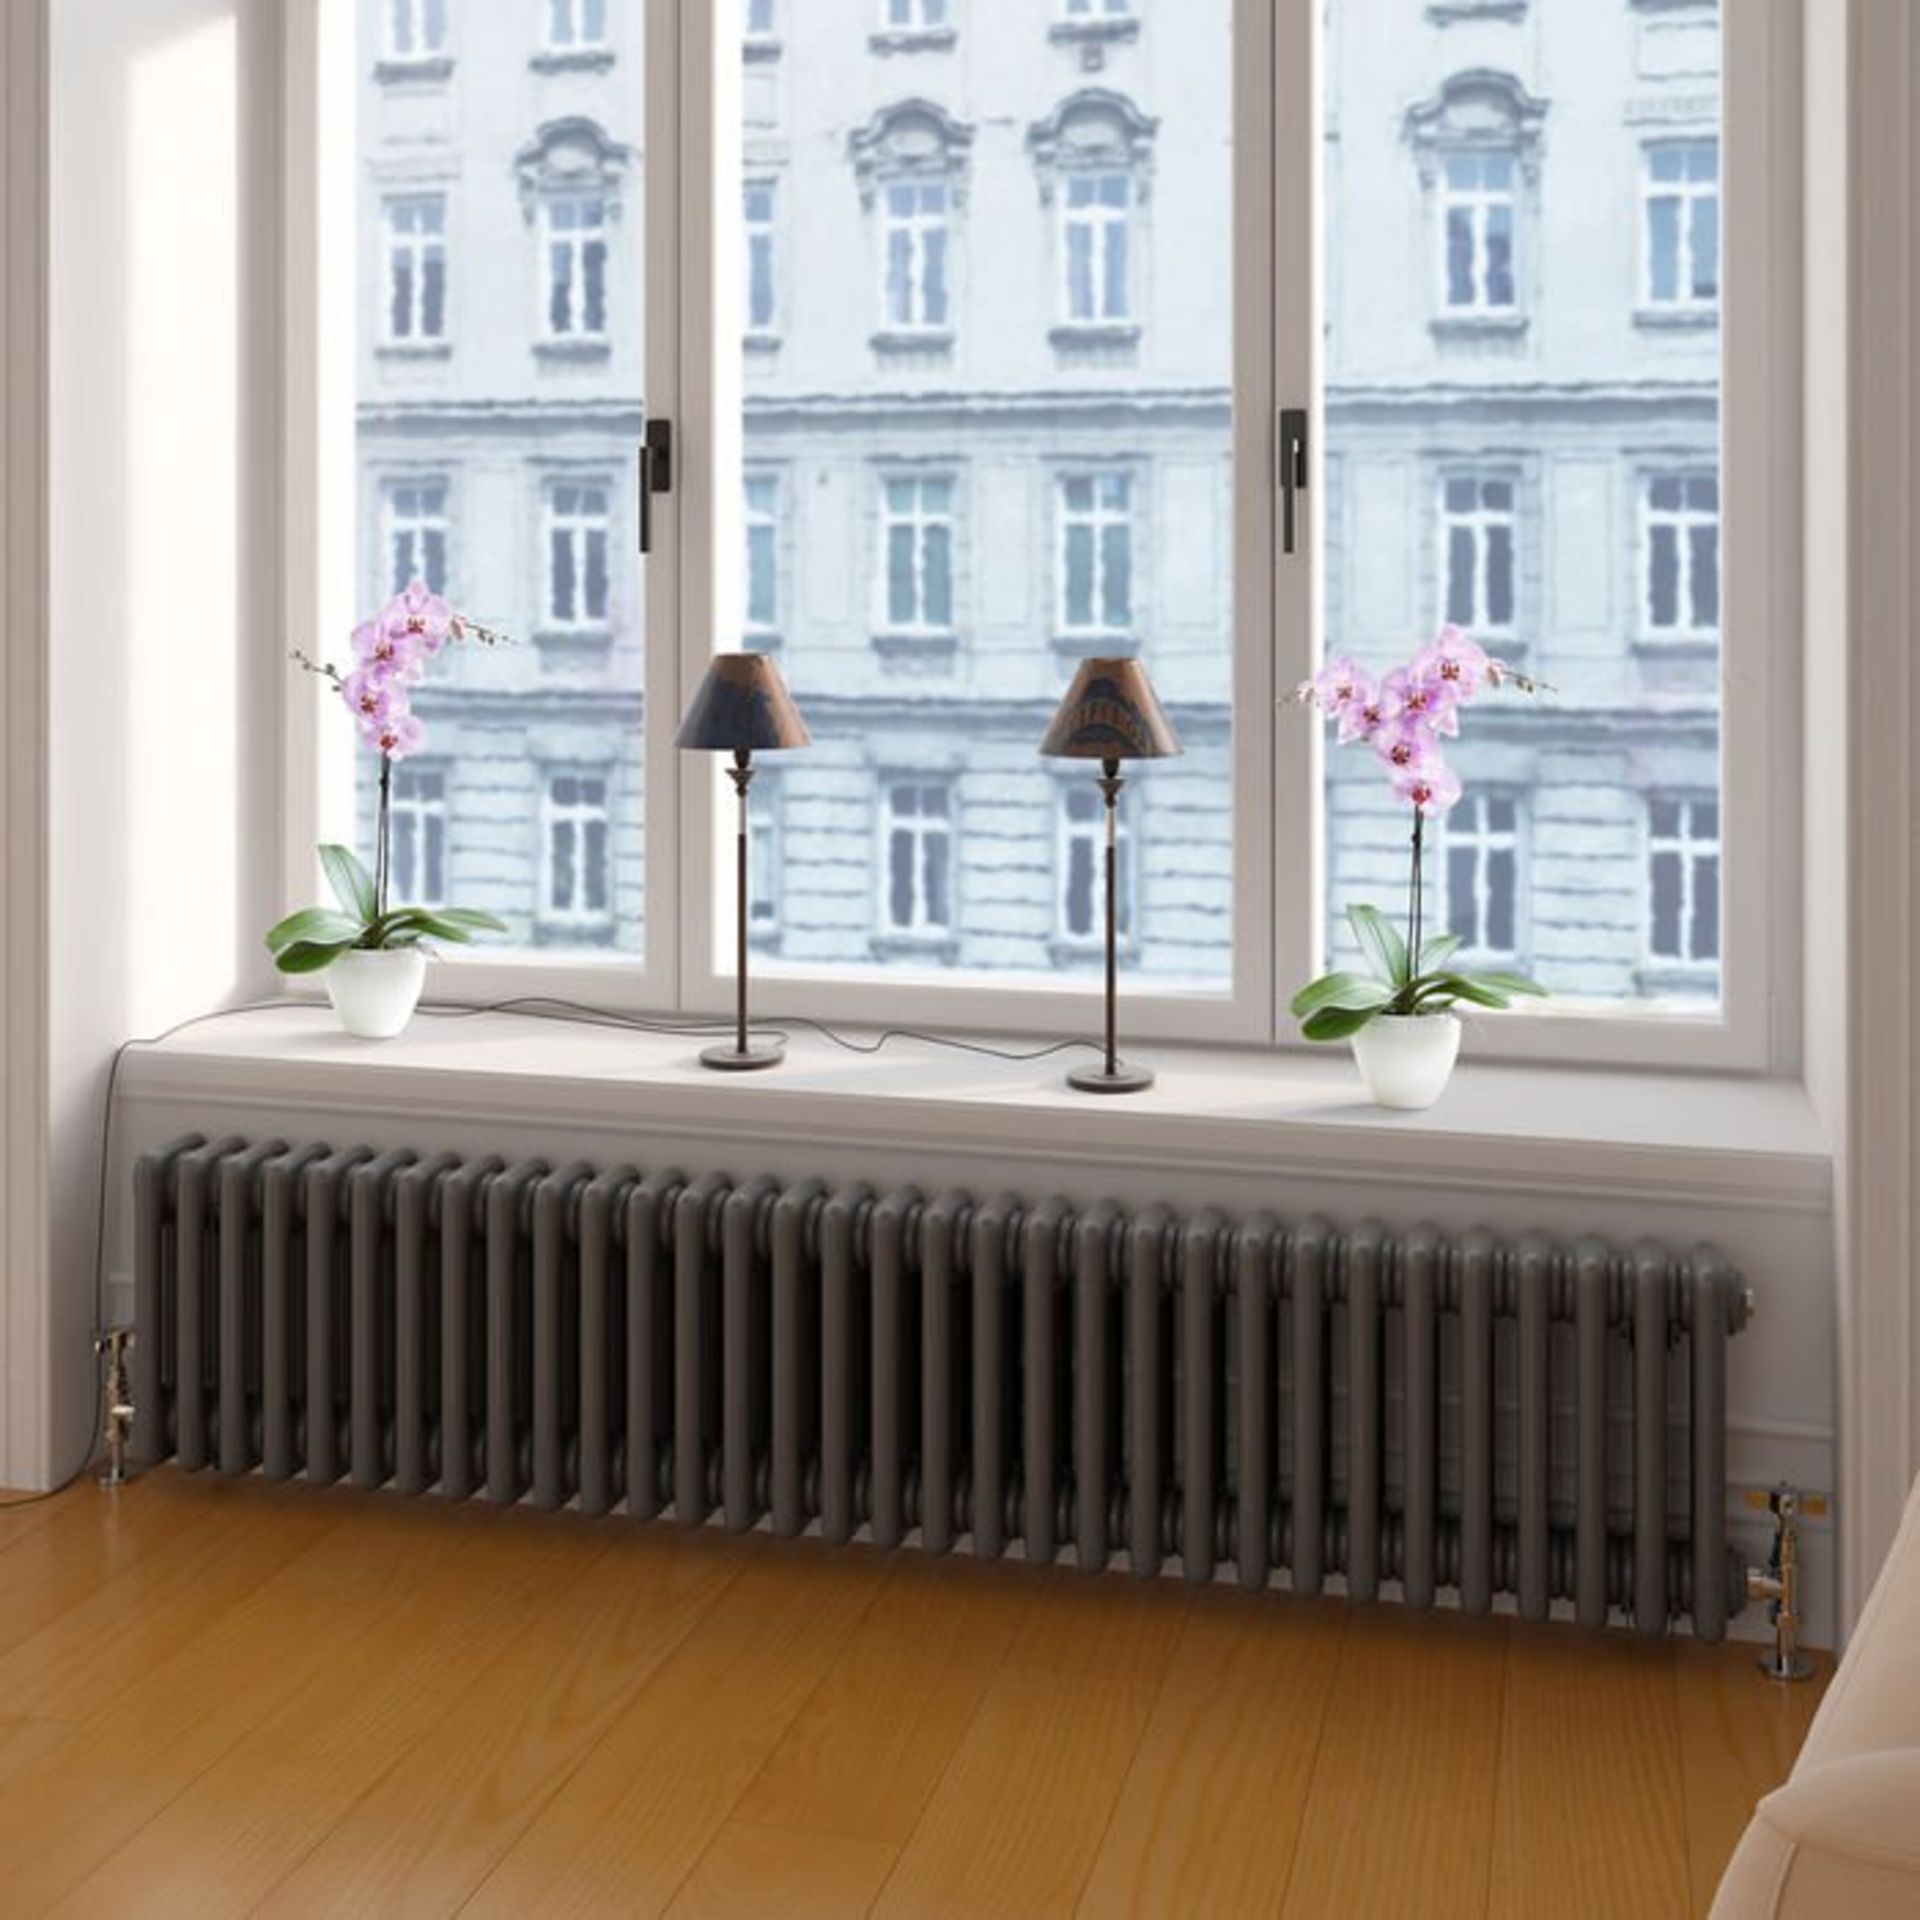 (L147) 300x1458mm Anthracite Triple Panel Horizontal Colosseum Traditional Radiator. RRP £649.99. - Image 3 of 3